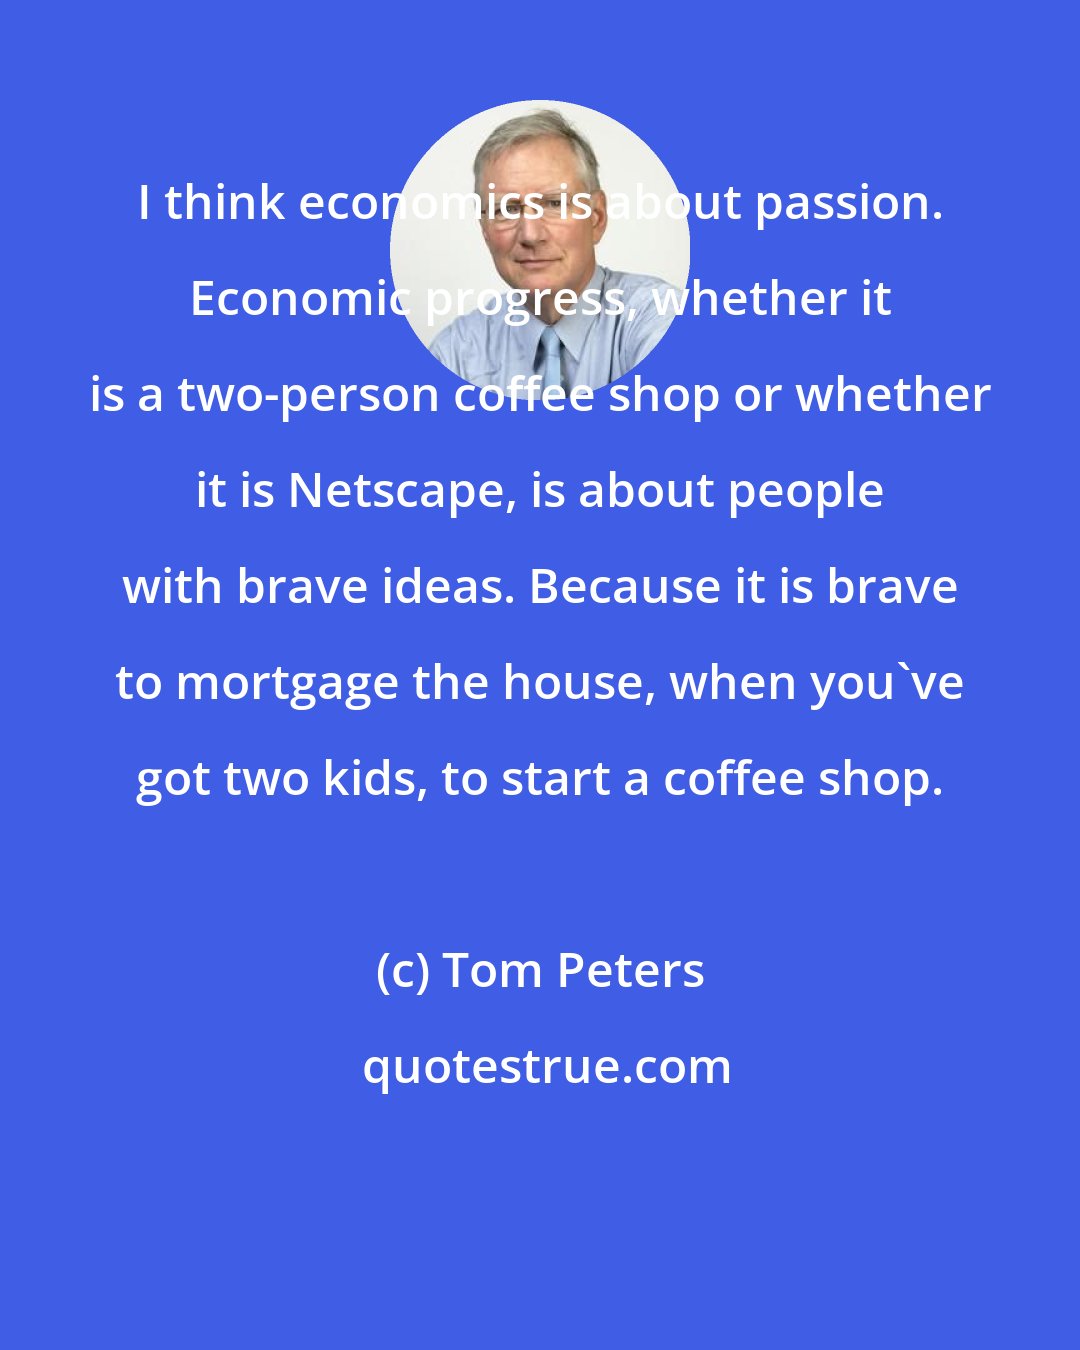 Tom Peters: I think economics is about passion. Economic progress, whether it is a two-person coffee shop or whether it is Netscape, is about people with brave ideas. Because it is brave to mortgage the house, when you've got two kids, to start a coffee shop.